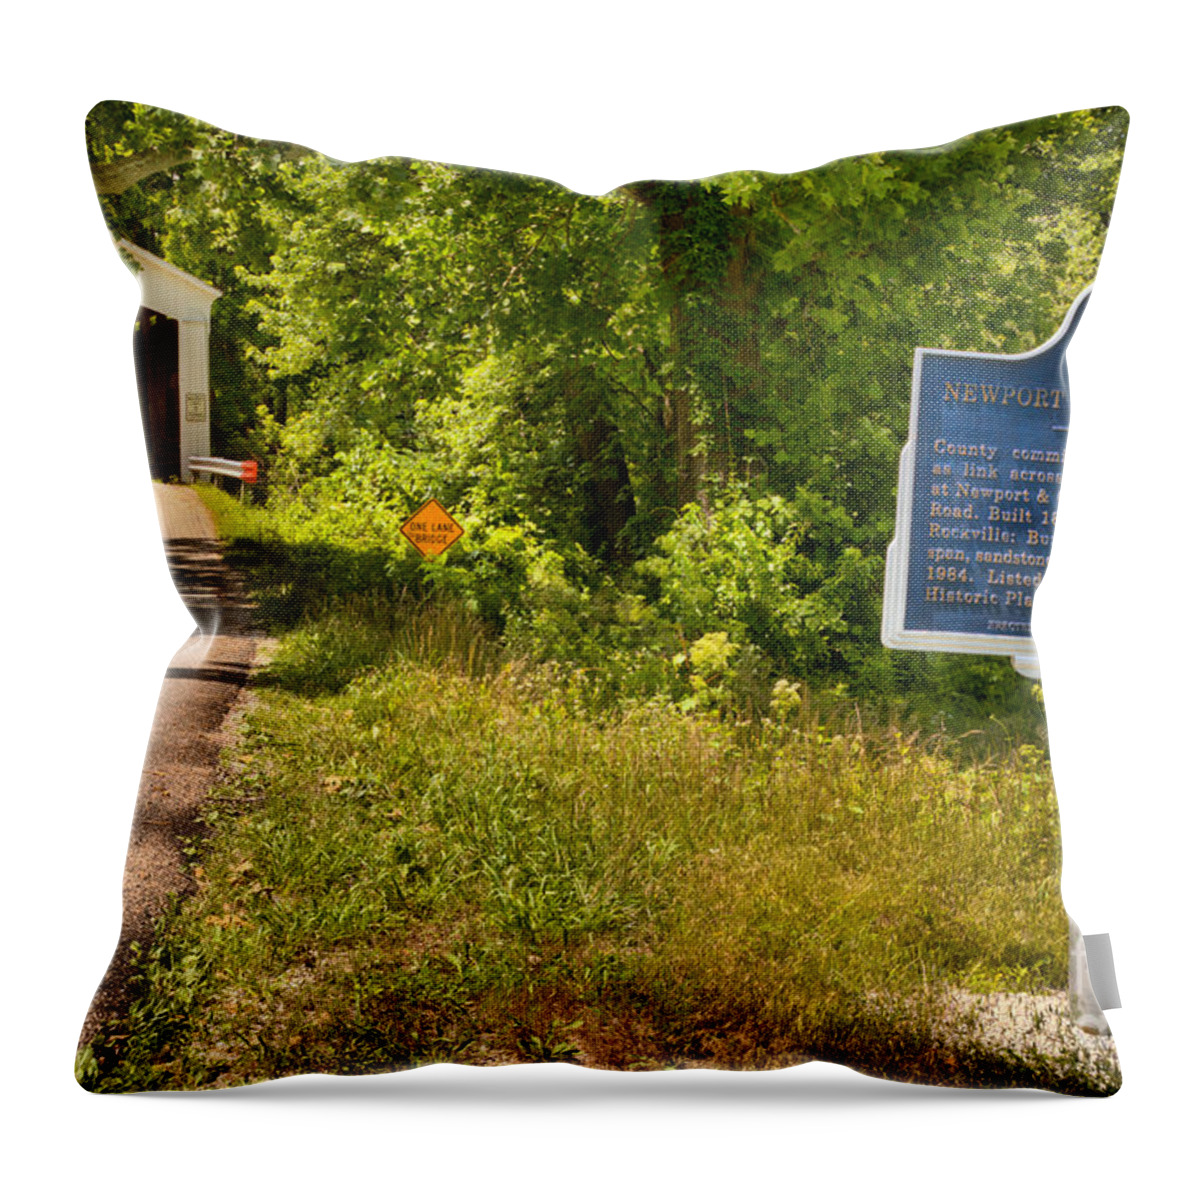 Newport Covered Bridge Throw Pillow featuring the photograph Newport Covered Bridge Sign by Adam Jewell